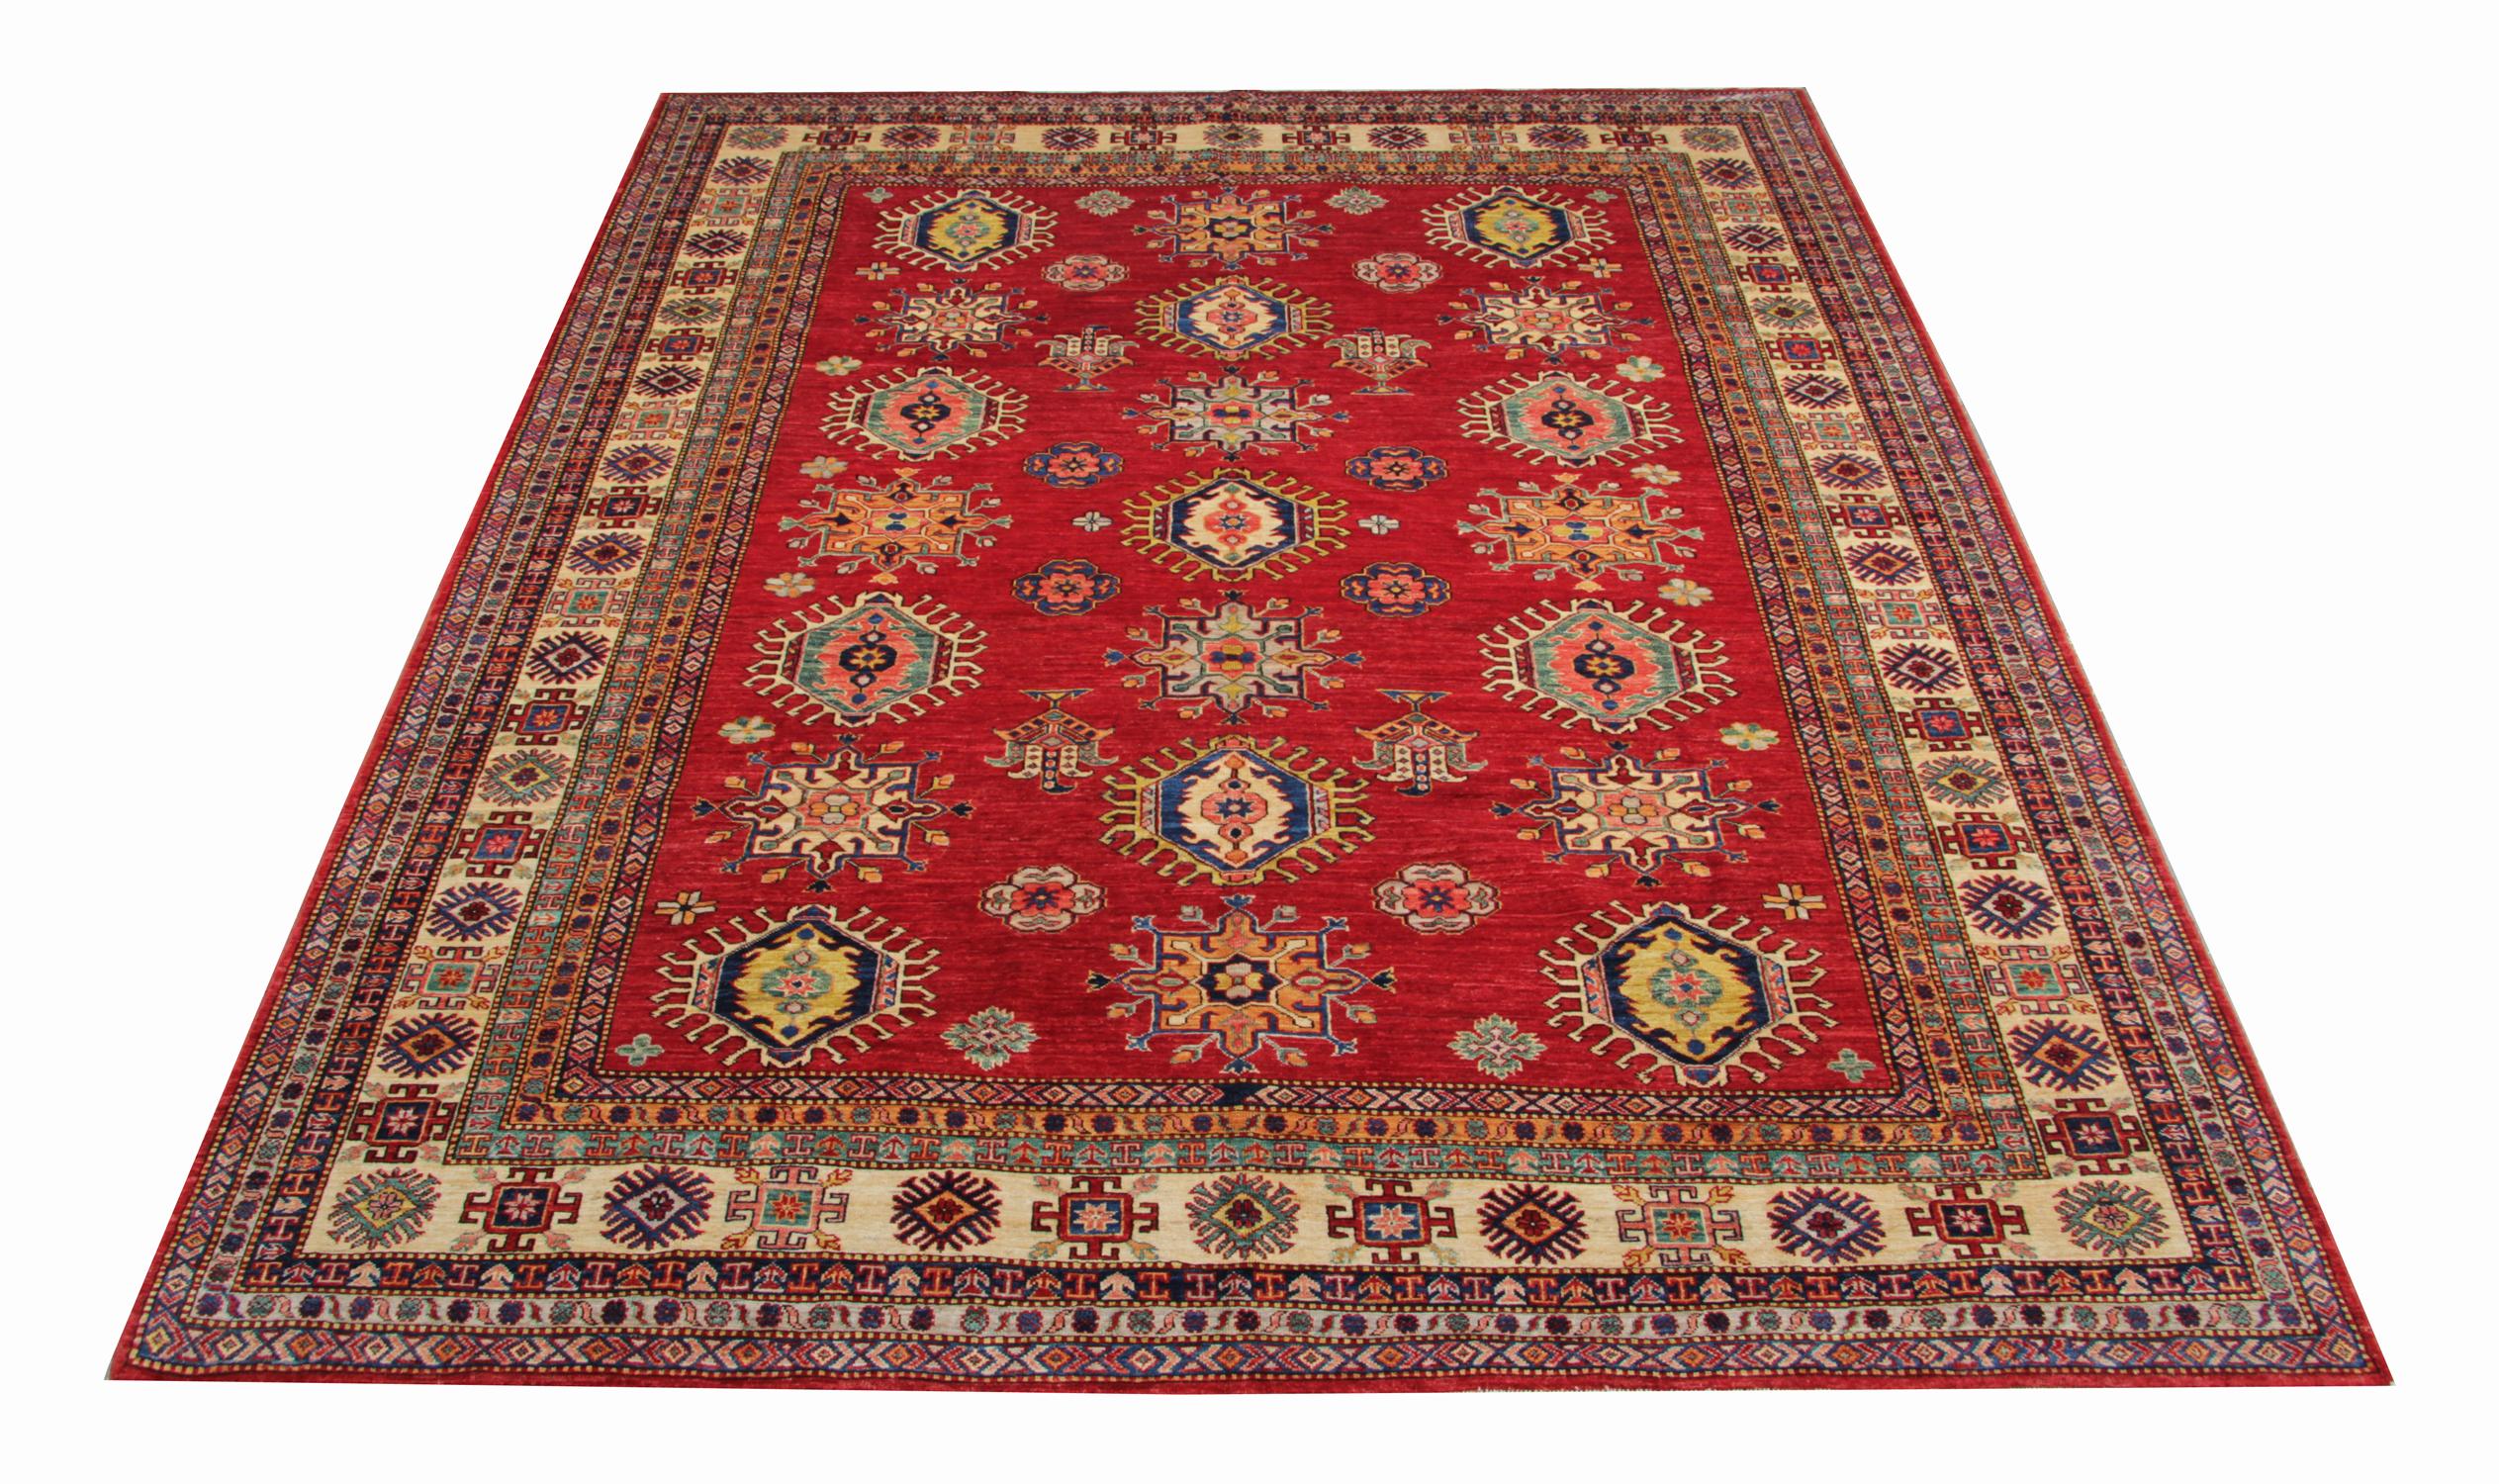 These rustic new traditional handmade rugs feature designs from the Kazak region. A conventional tribal rug is famous in the part of Kazak Area. Afghan weavers have made this handwoven rug of top-quality wool and cotton. This primitive carpet rug